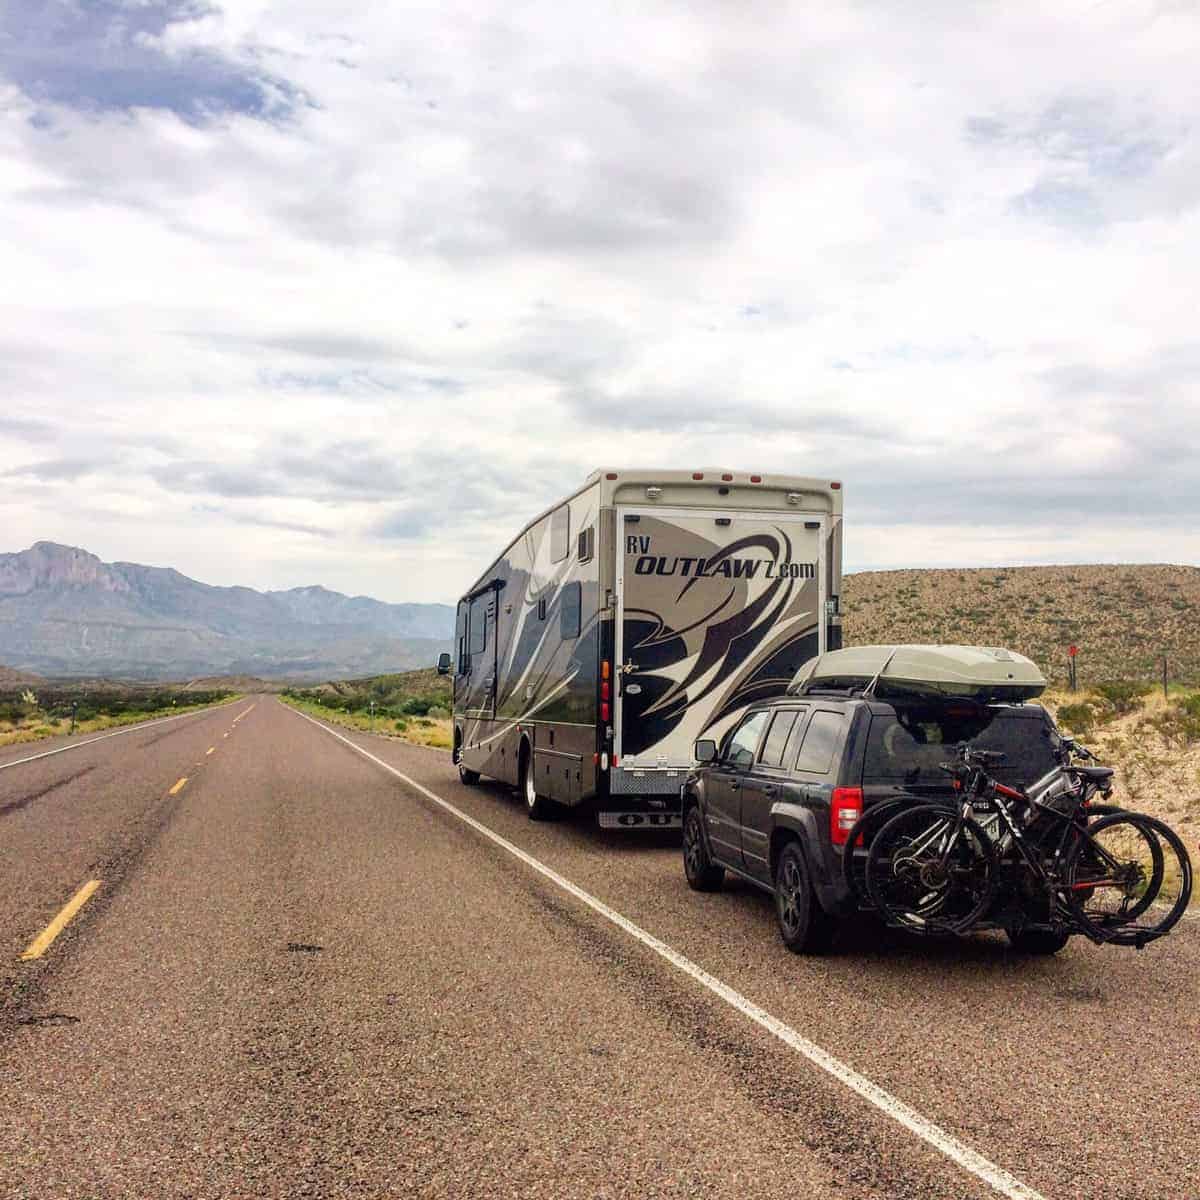 What Jeep Can Be Flat Towed Behind an RV?